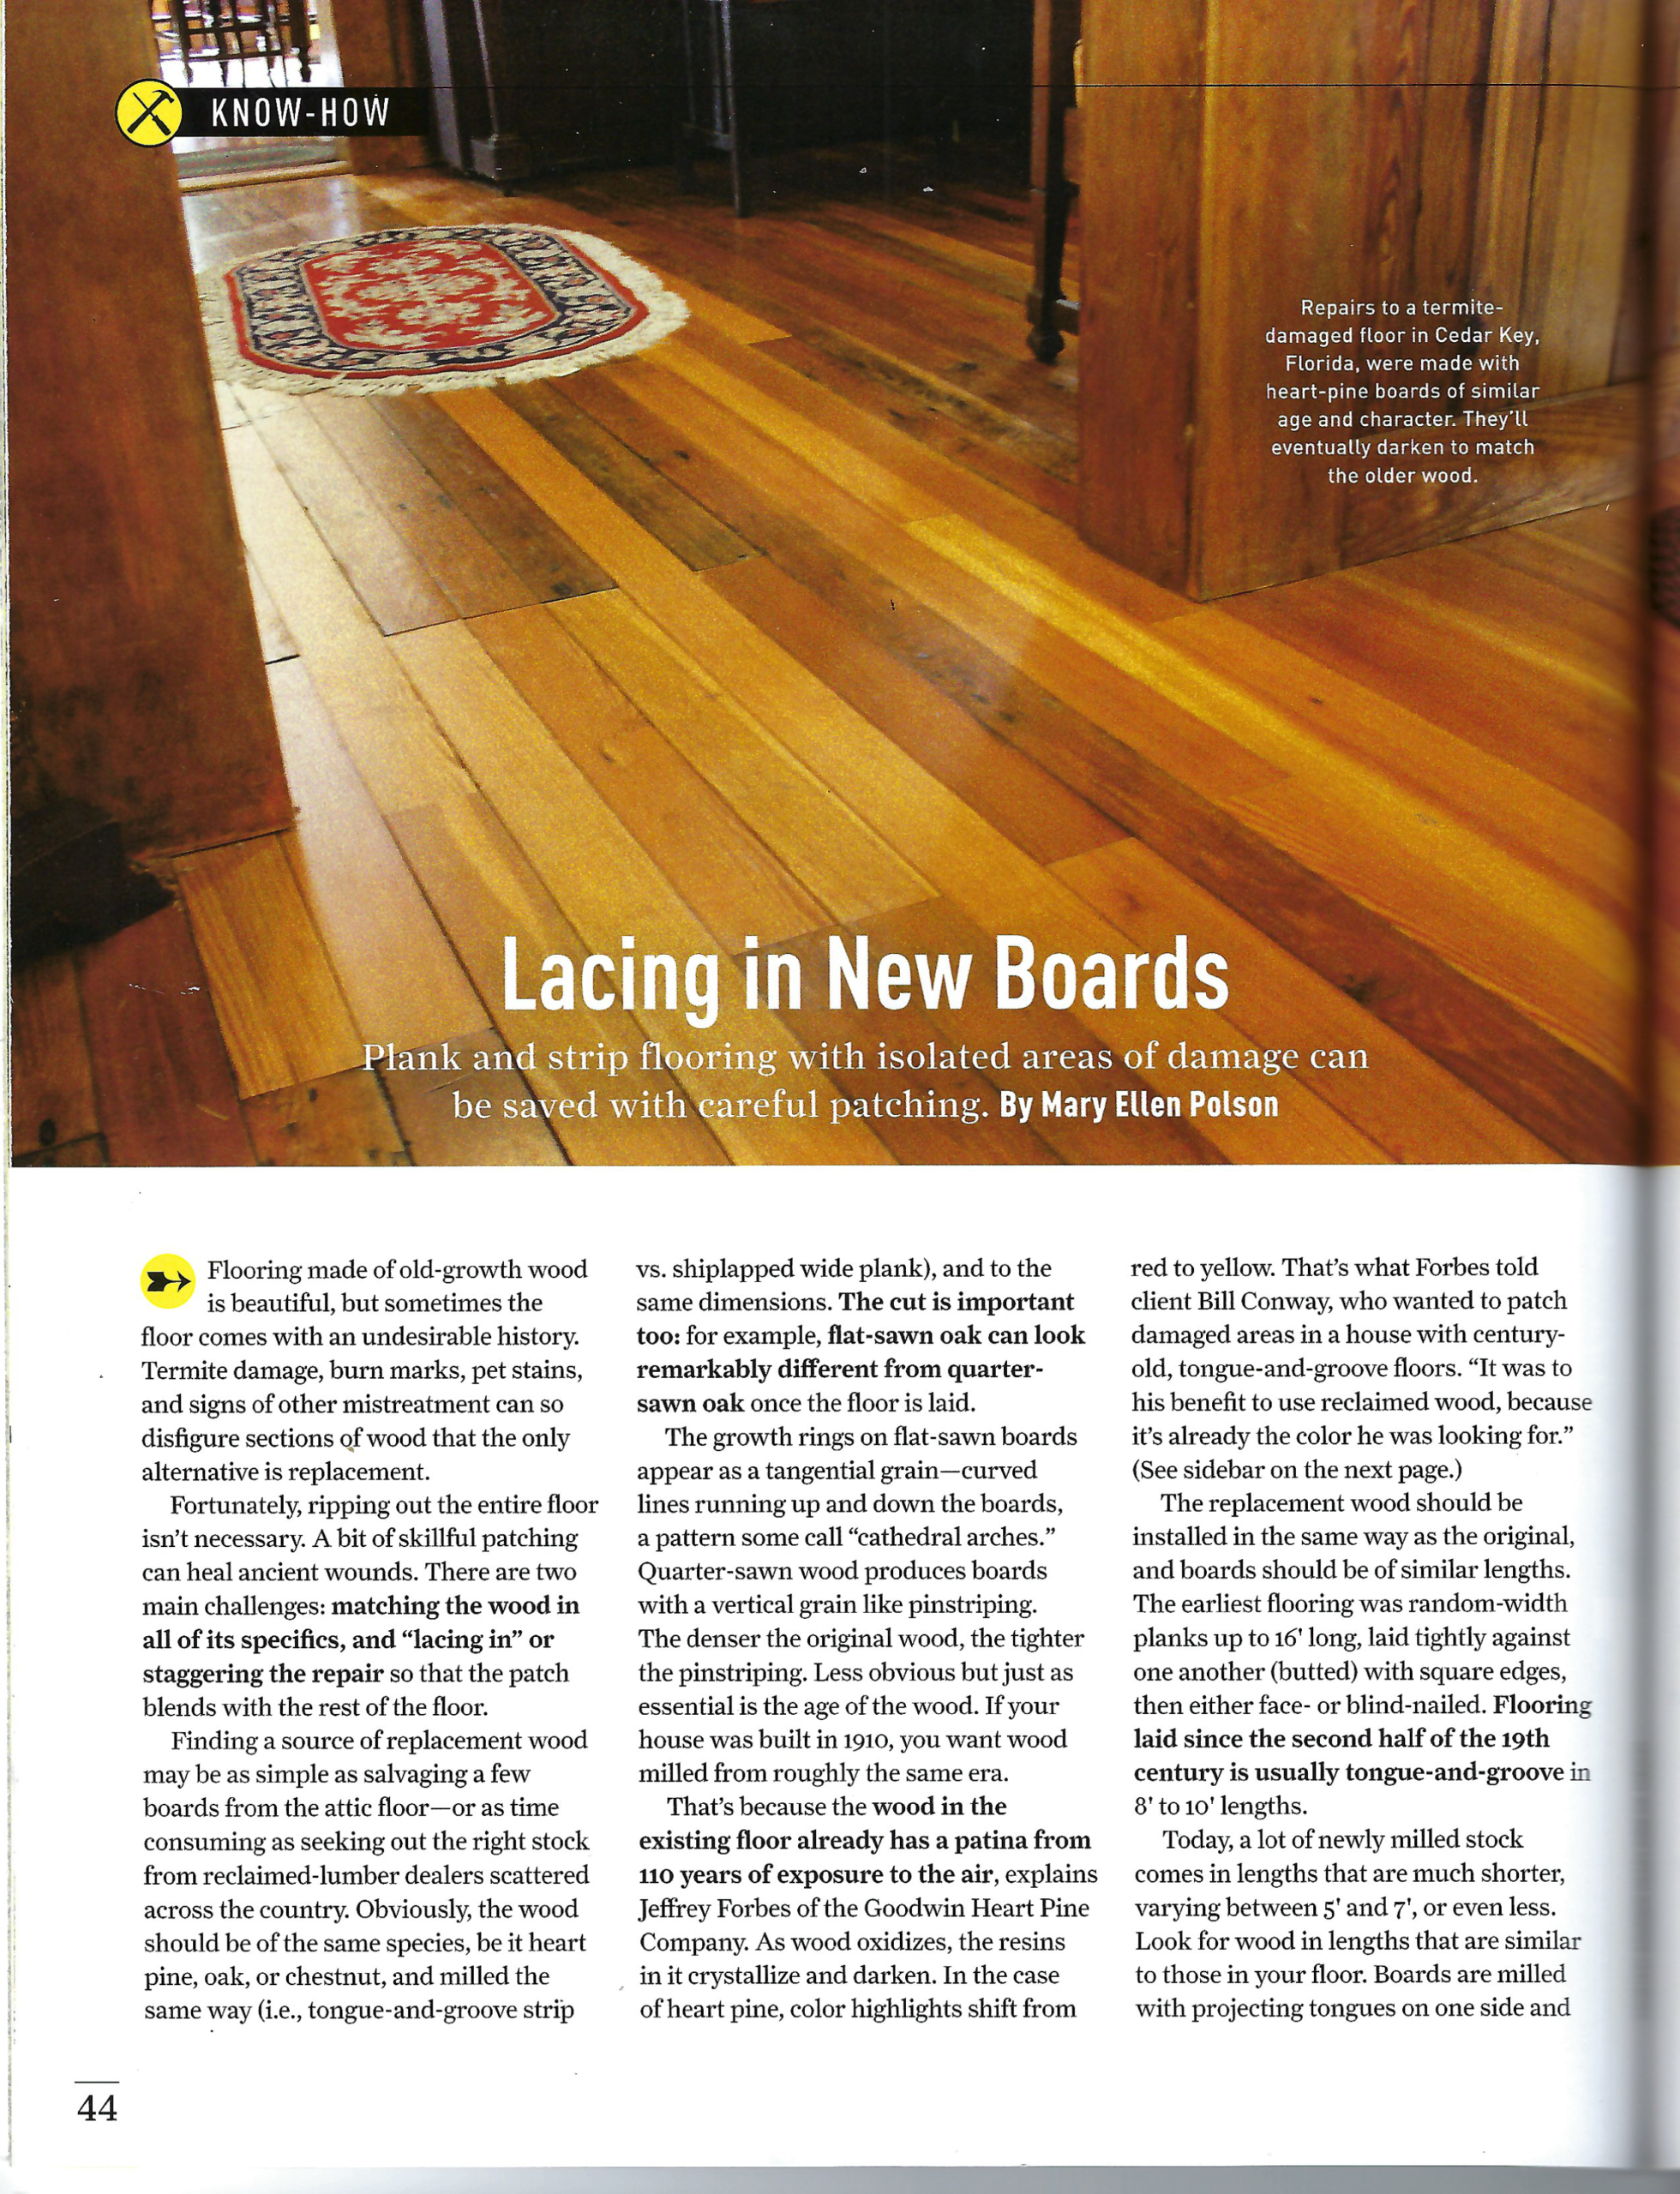 Finding Replacement Boards for Your Old Wood Floors. Old House Journal Lacing in New Boards.